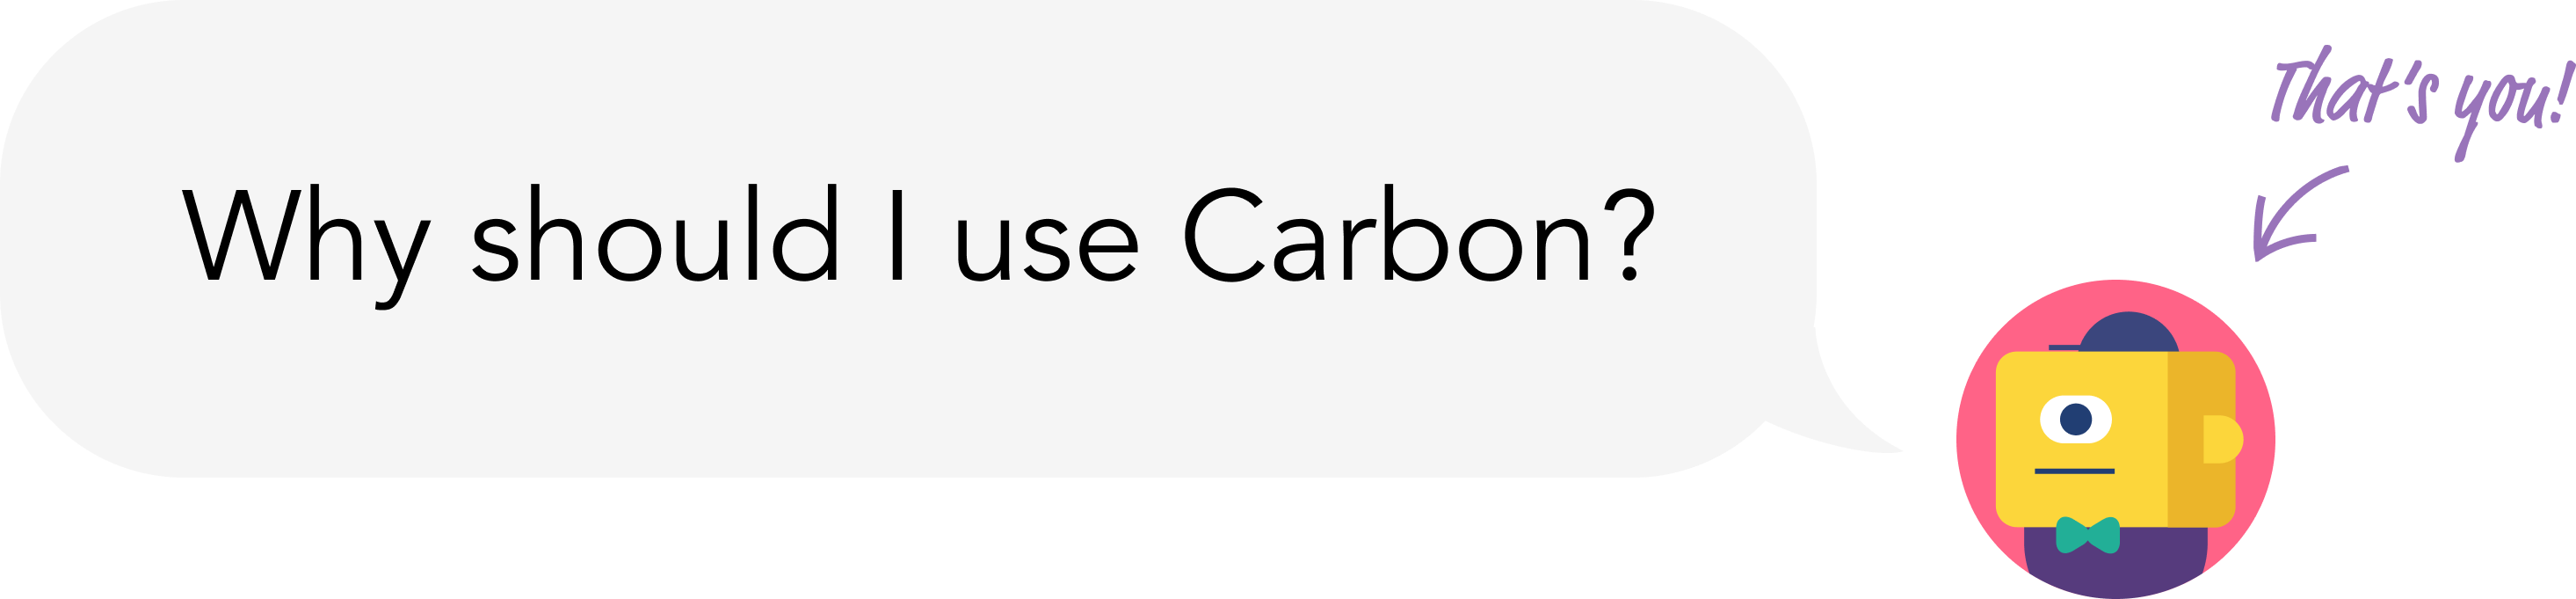 thats-you-carbon